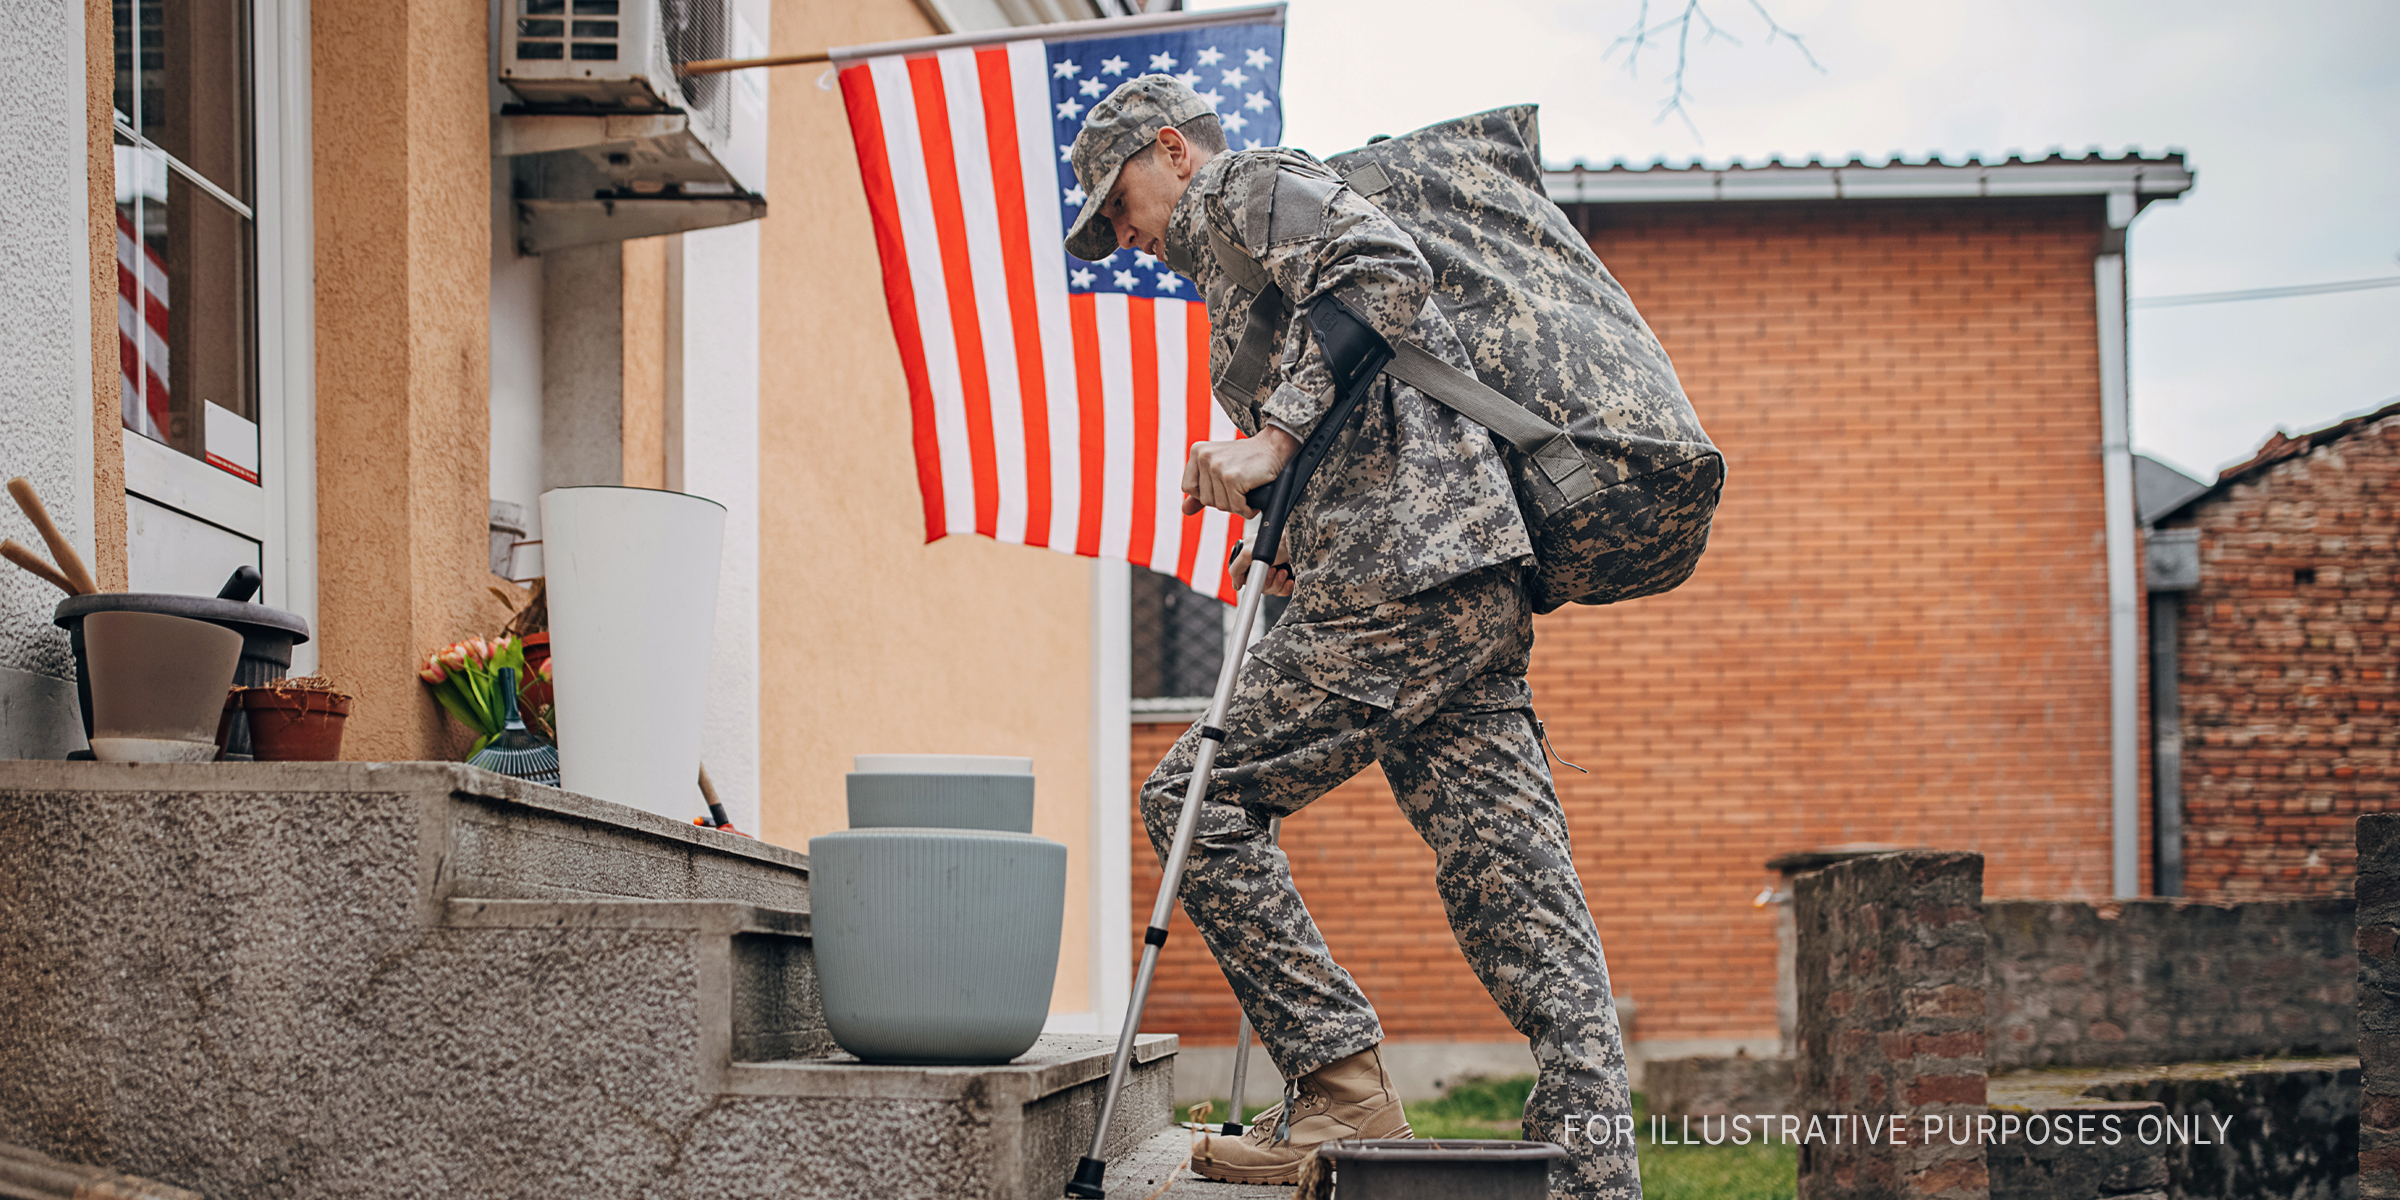 A soldier standing outside a house | Source: Getty Images